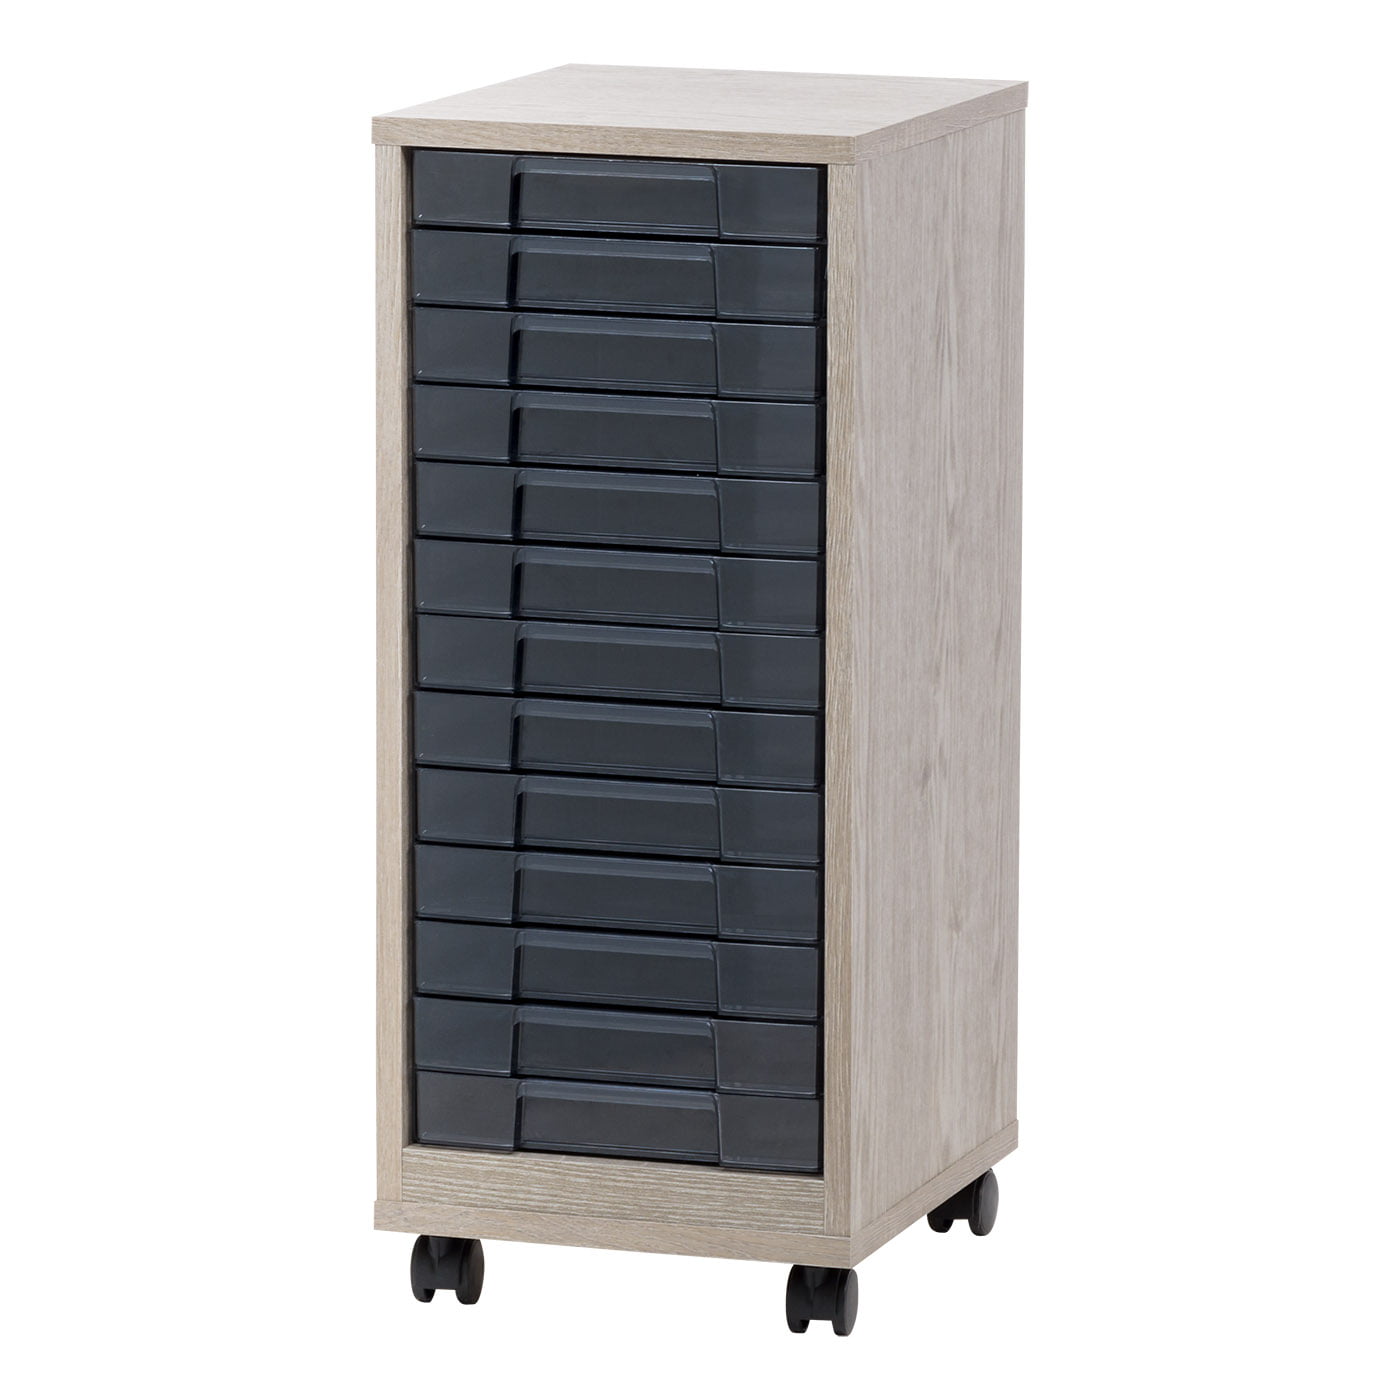 IRIS USA Wooden Multifunctional Storage Office Supply Drawers Cart Ash Gray 913ca3bf Dd55 4930 A707 09bedae997d4.2d3815c3d62d8927888a5fbc47d679dc 